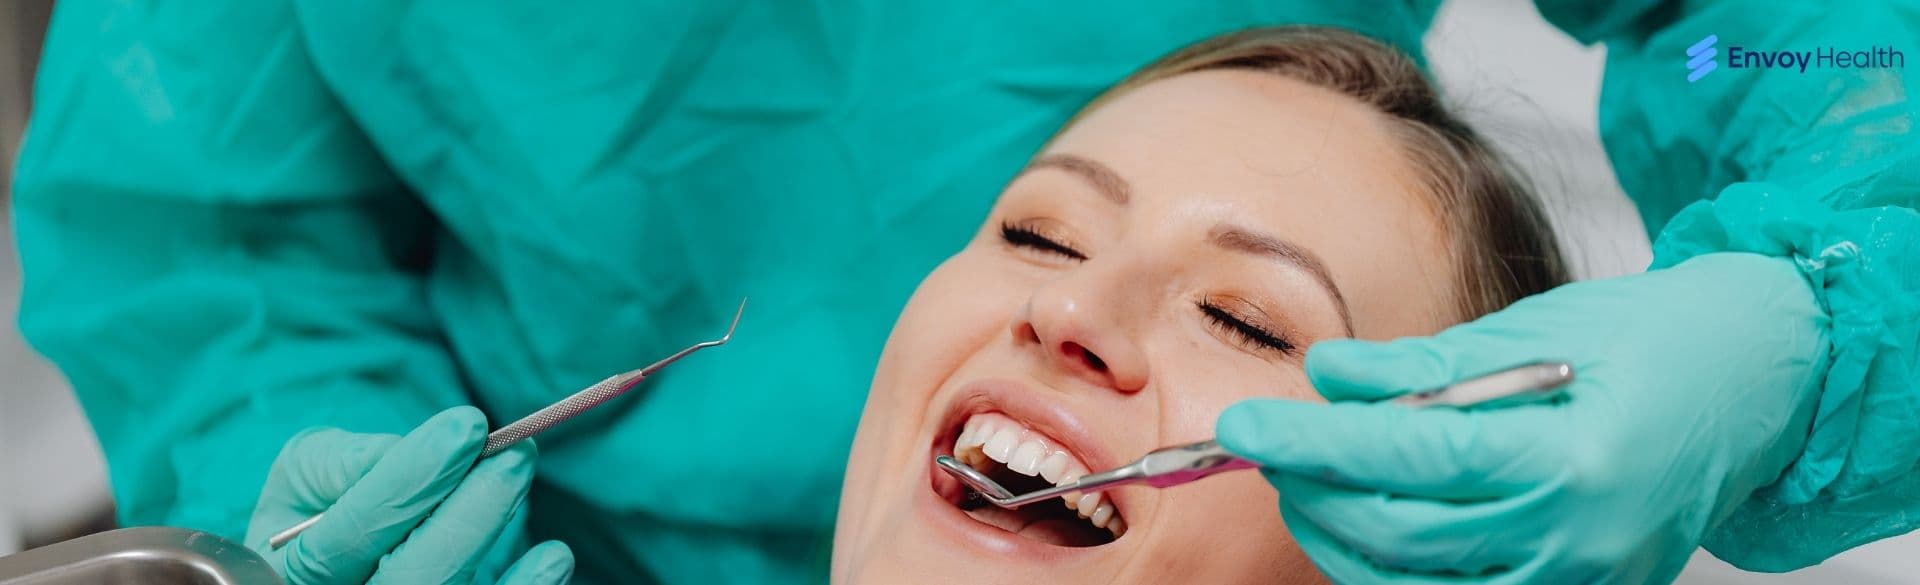 How Americans Get Affordable Dental Care in Mexico?